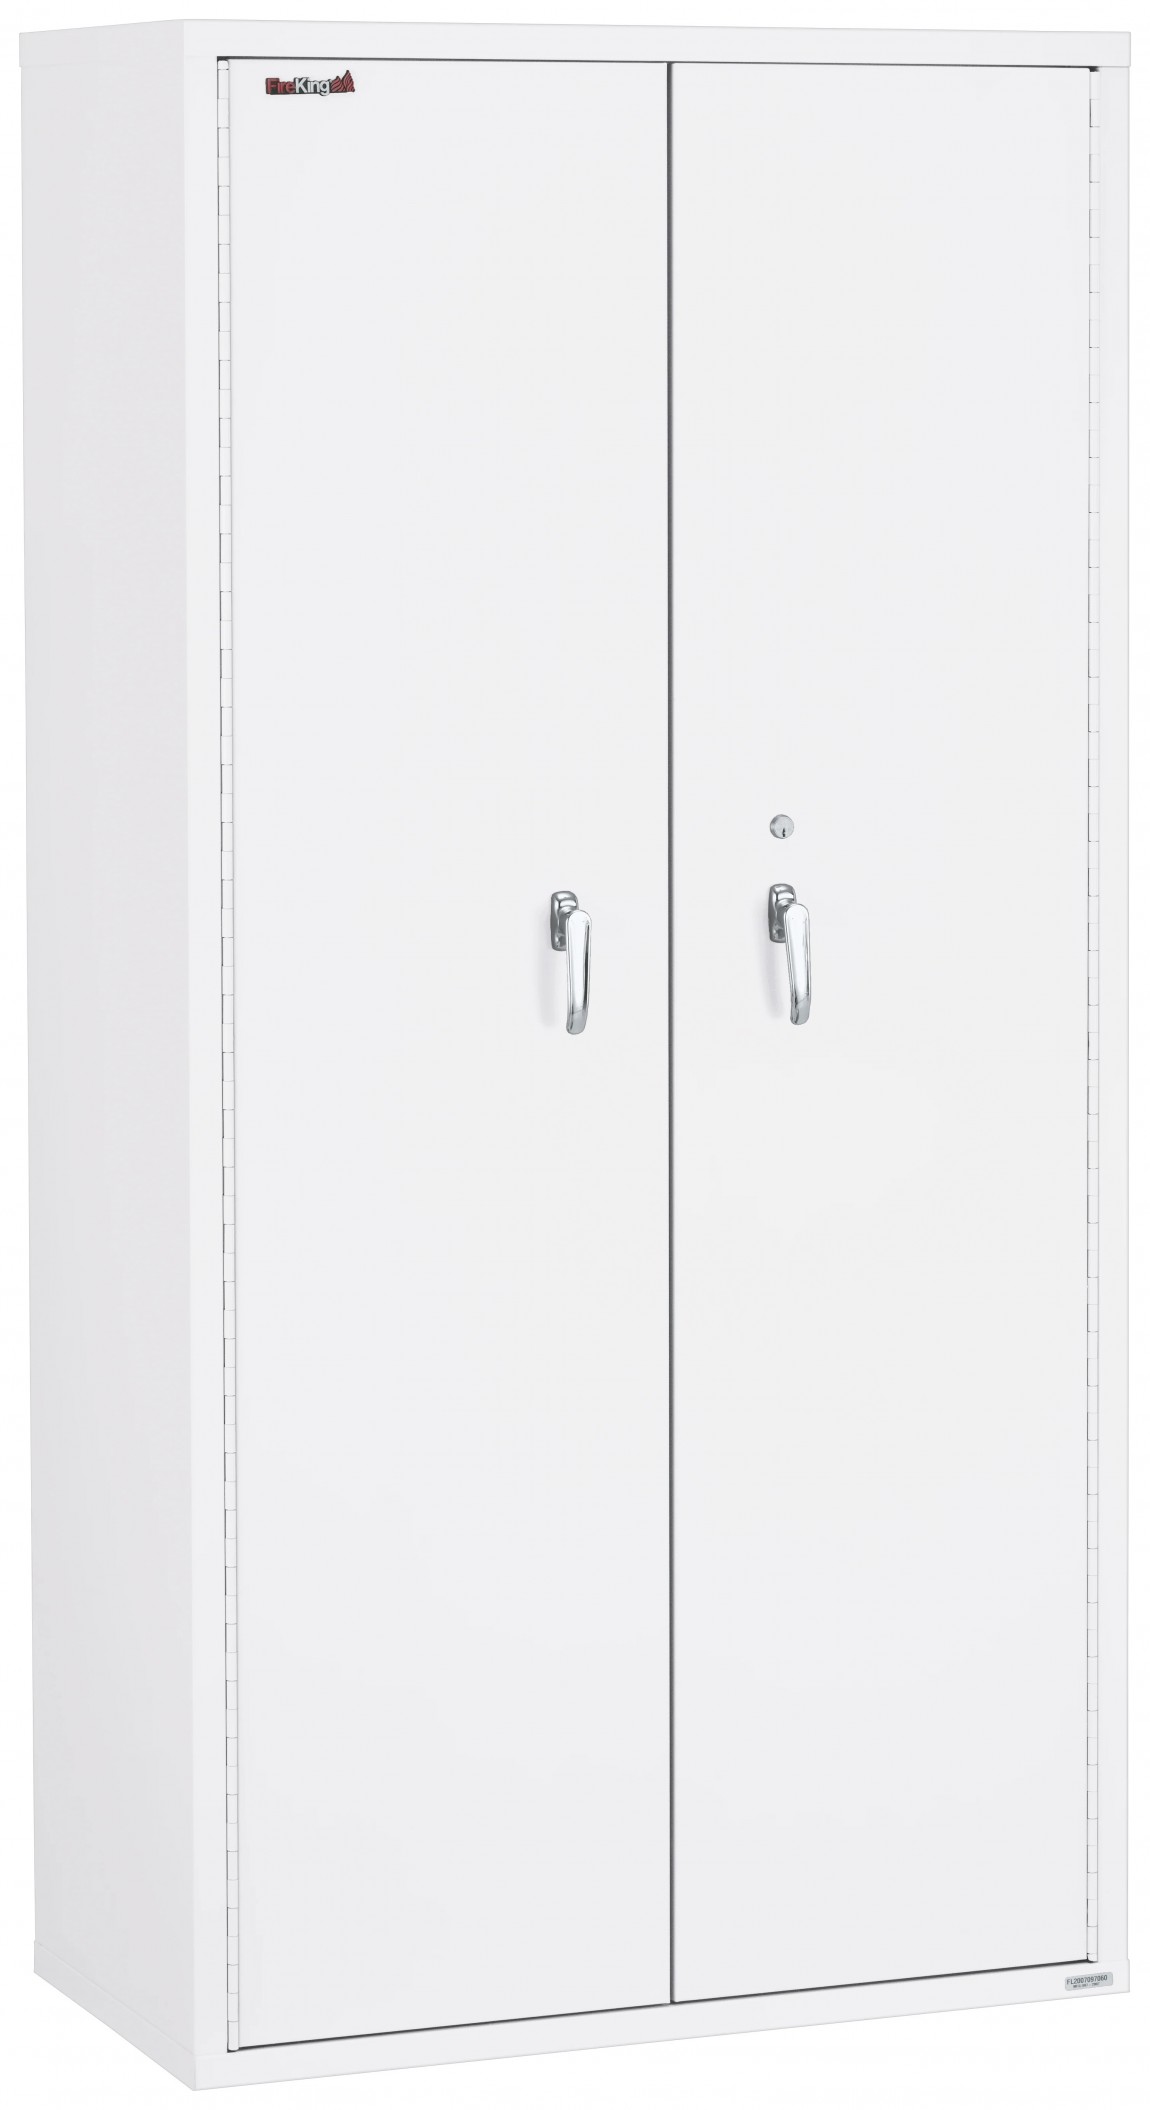 Fireproof Storage Cabinet - 72 Tall